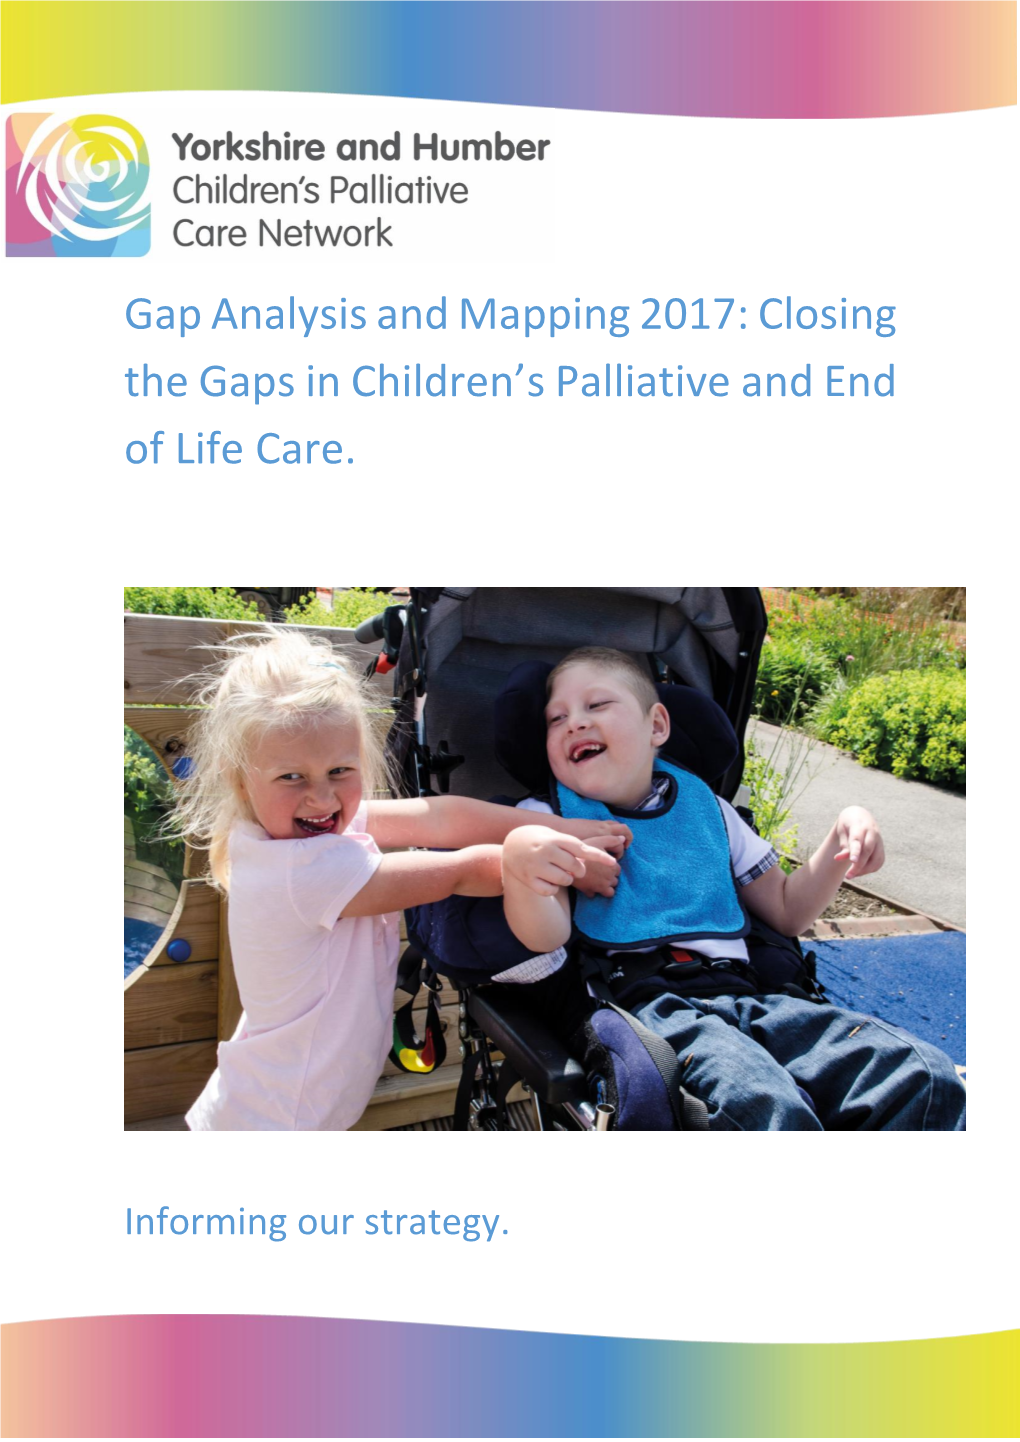 Closing the Gaps in Children's Palliative and End of Life Care